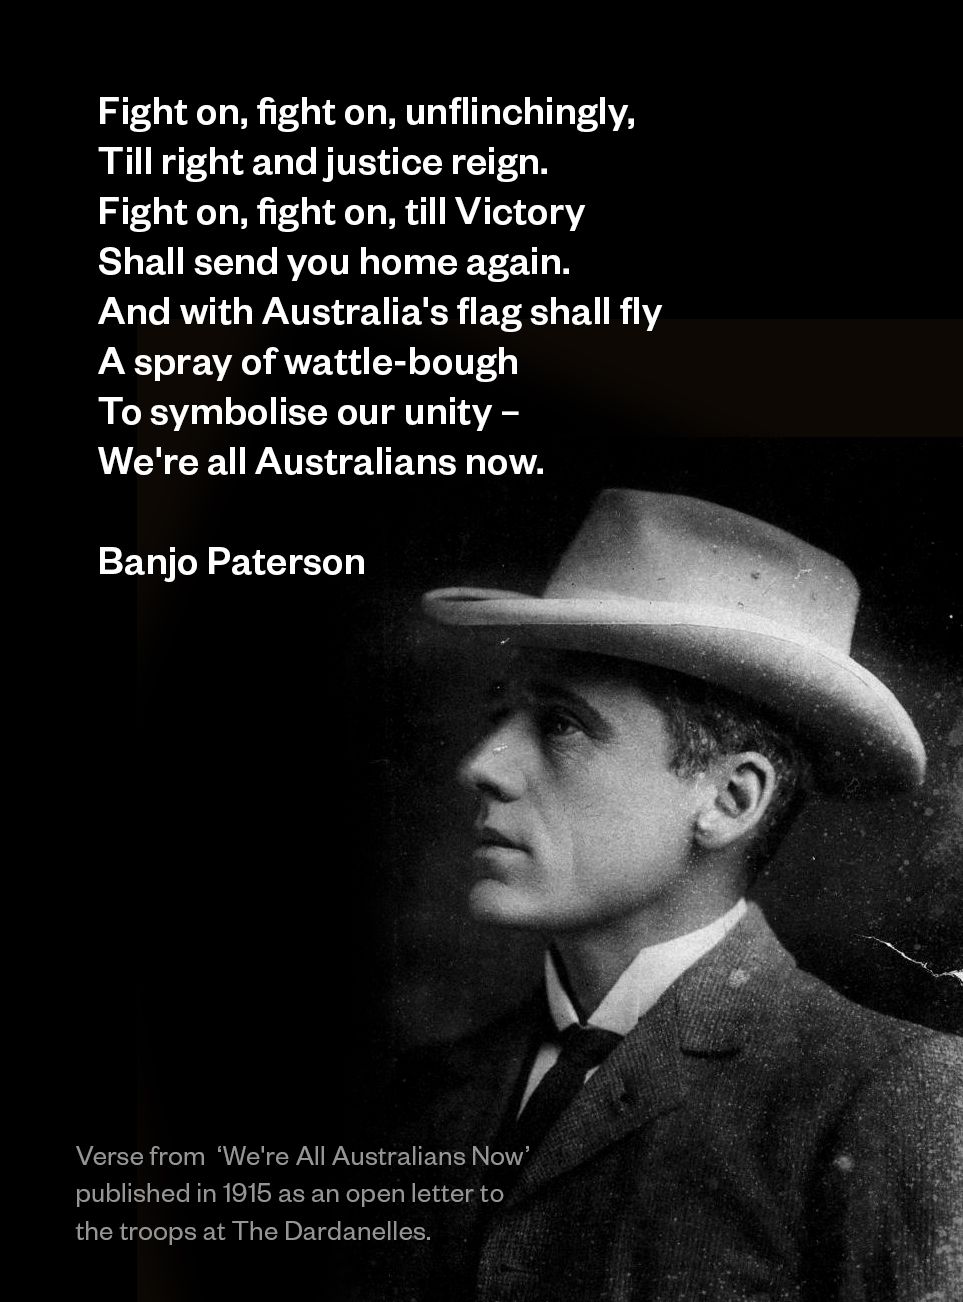 Short Inspirational Banjo Paterson Poem The Man From Snowy River